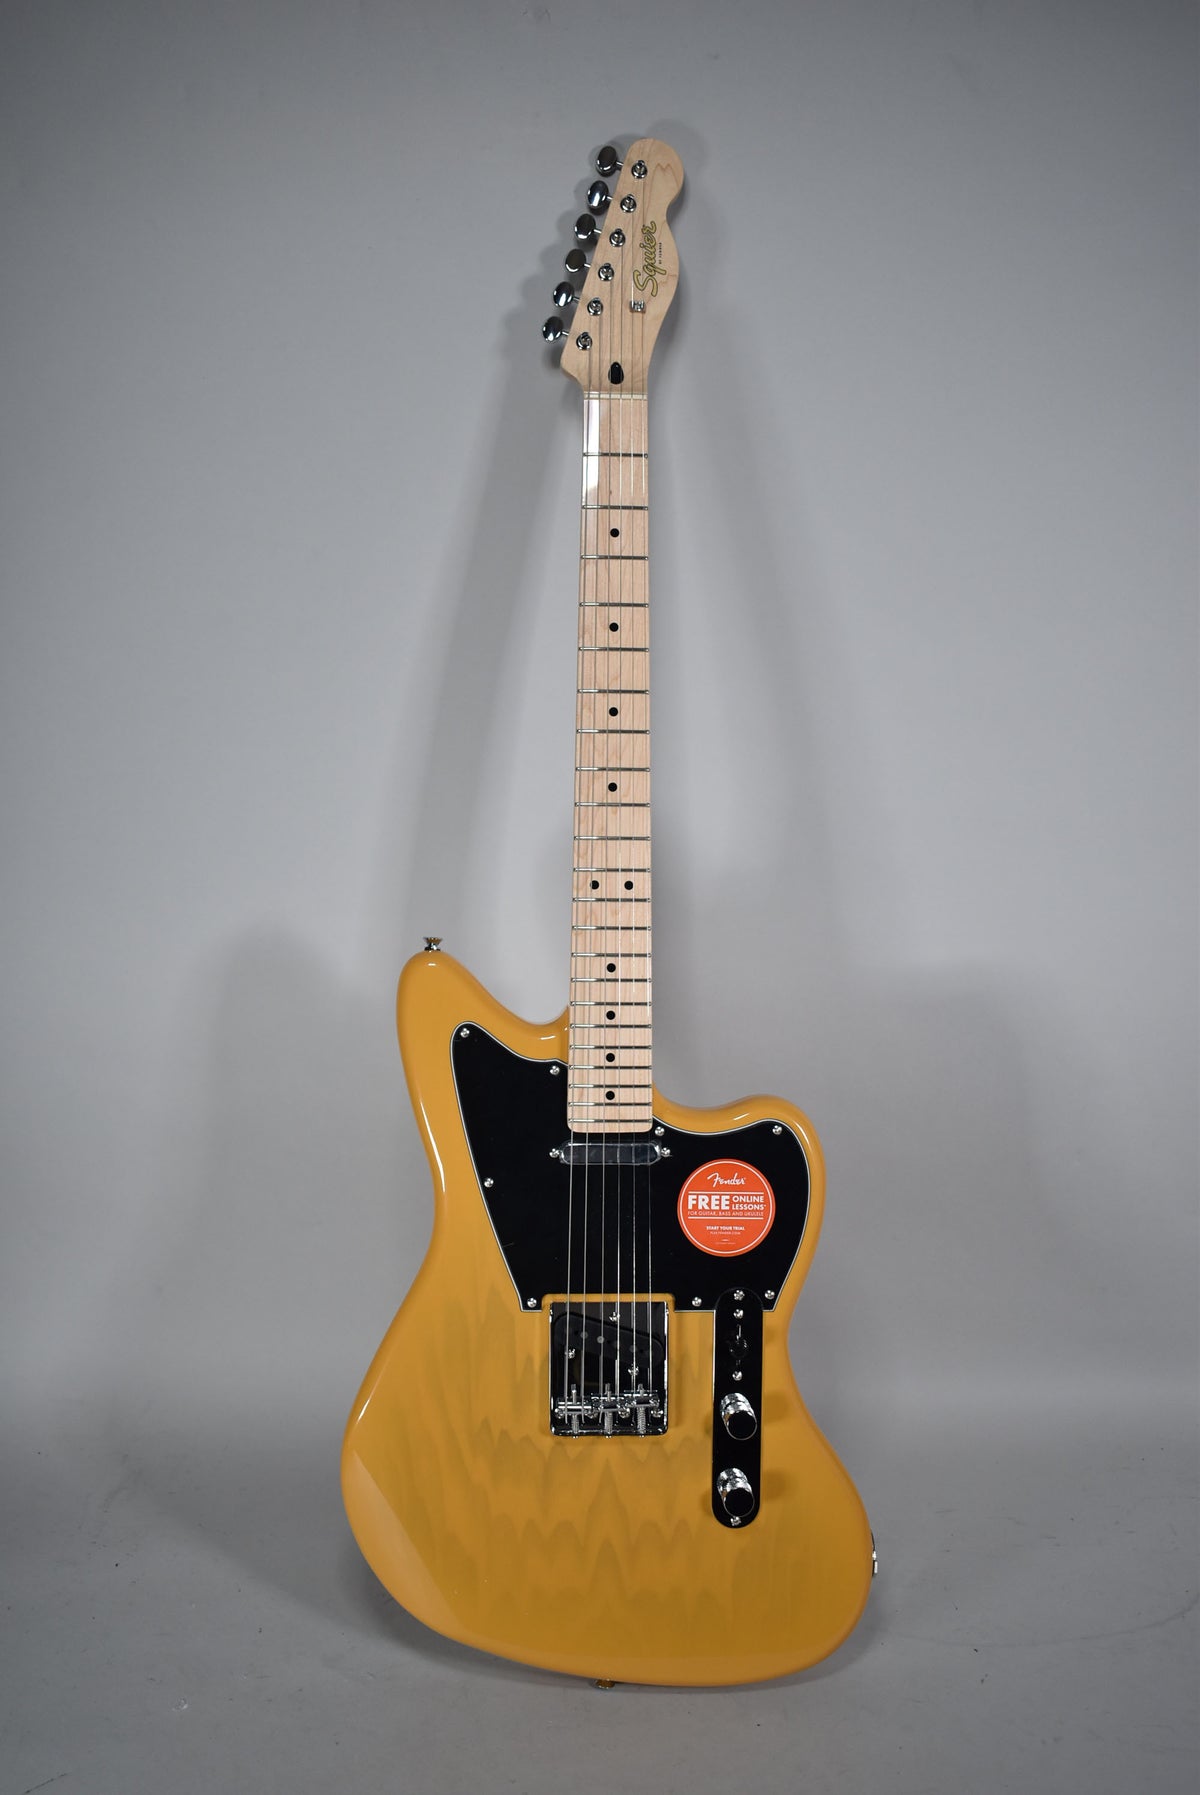 2022 Squier Paranormal Offset Telecaster Butterscotch Finish